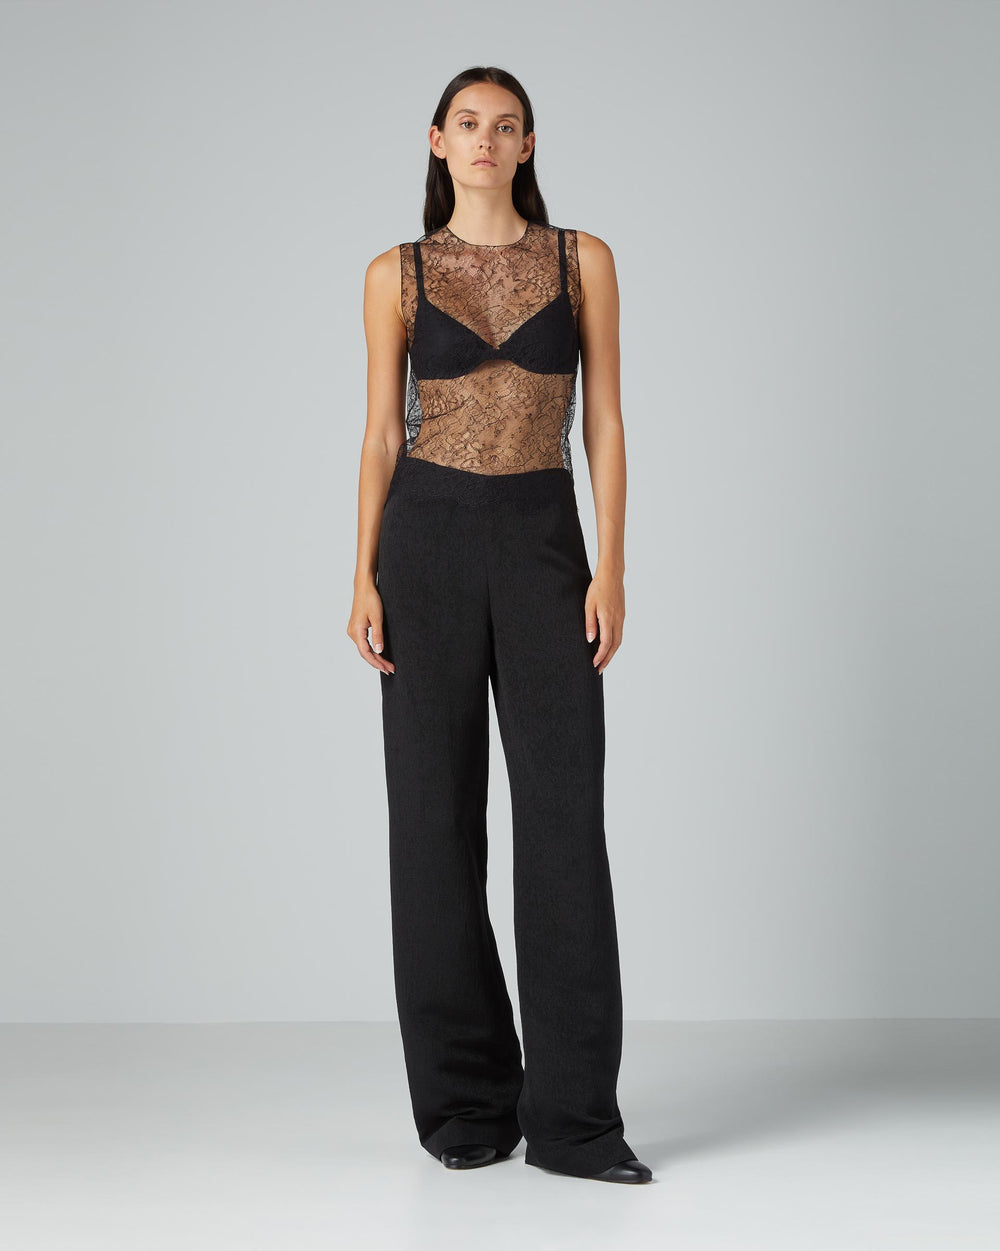 Ginerva Top in Lace, Black